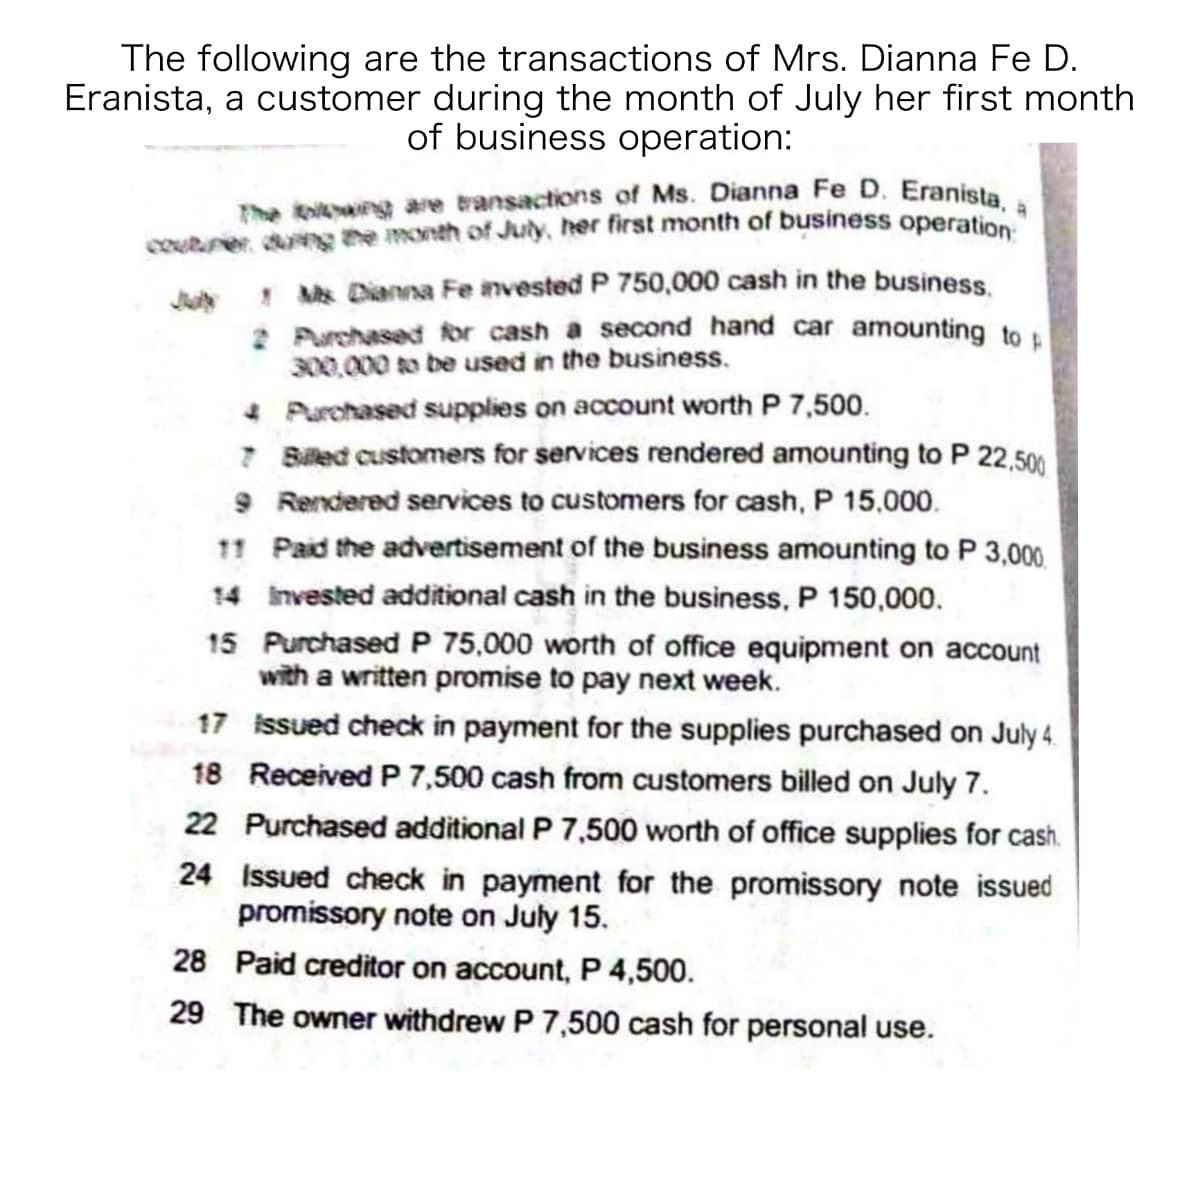 The koi are transactions of Ms. Dianna Fe D. Eranista, a
The following are the transactions of Mrs. Dianna Fe D.
Eranista, a customer during the month of July her first month
of business operation:
coutner dng the month of July, her first month of business operatio
! Ms Dianna Fe invested P 750,000 cash in the business
2 Purchased for cash a second hand car amounting to
00,000 to be used in the business.
4 Purchased supplies on account worth P 7,500.
7 Biled customers for services rendered amounting to P 22,500
9 Rendered services to customers for cash, P 15,000.
11 Paid the advertisement of the business amounting to P 3,000.
14 invested additional cash in the business, P 150,000.
15 Purchased P 75,000 worth of office equipment on account
with a written promise to pay next week.
17 issued check in payment for the supplies purchased on July 4.
18 Received P 7,500 cash from customers billed on July 7.
22 Purchased additional P 7,500 worth of office supplies for cash.
24 Issued check in payment for the promissory note issued
promissory note on July 15.
28 Paid creditor on account, P 4,500.
29 The owner withdrew P 7,500 cash for personal use.
